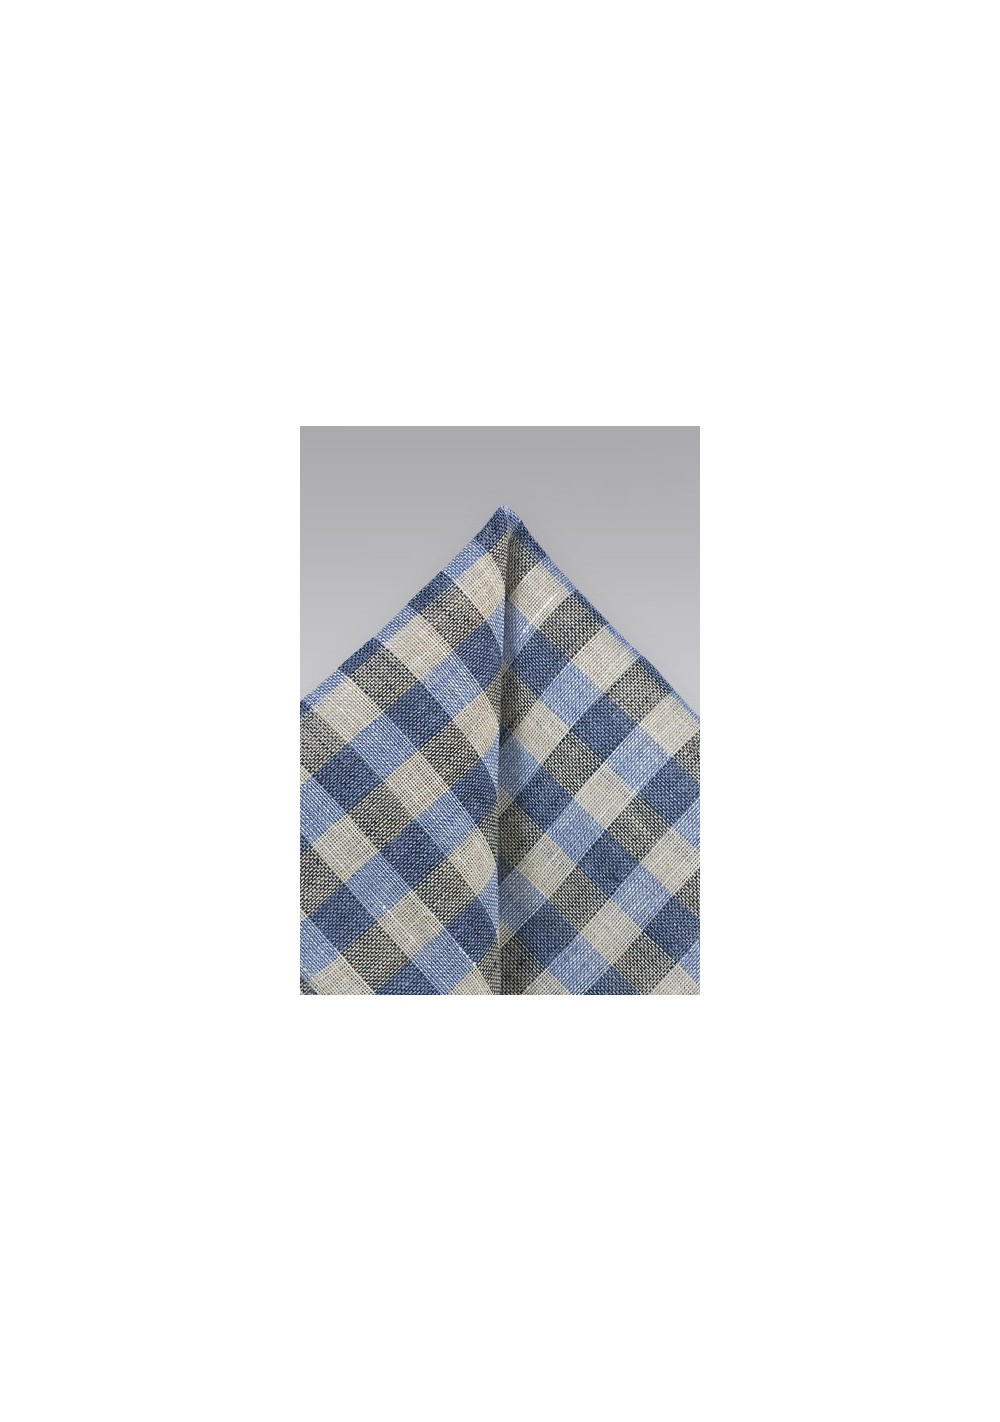 Plaid Pocket Square in Light Blue and Tan